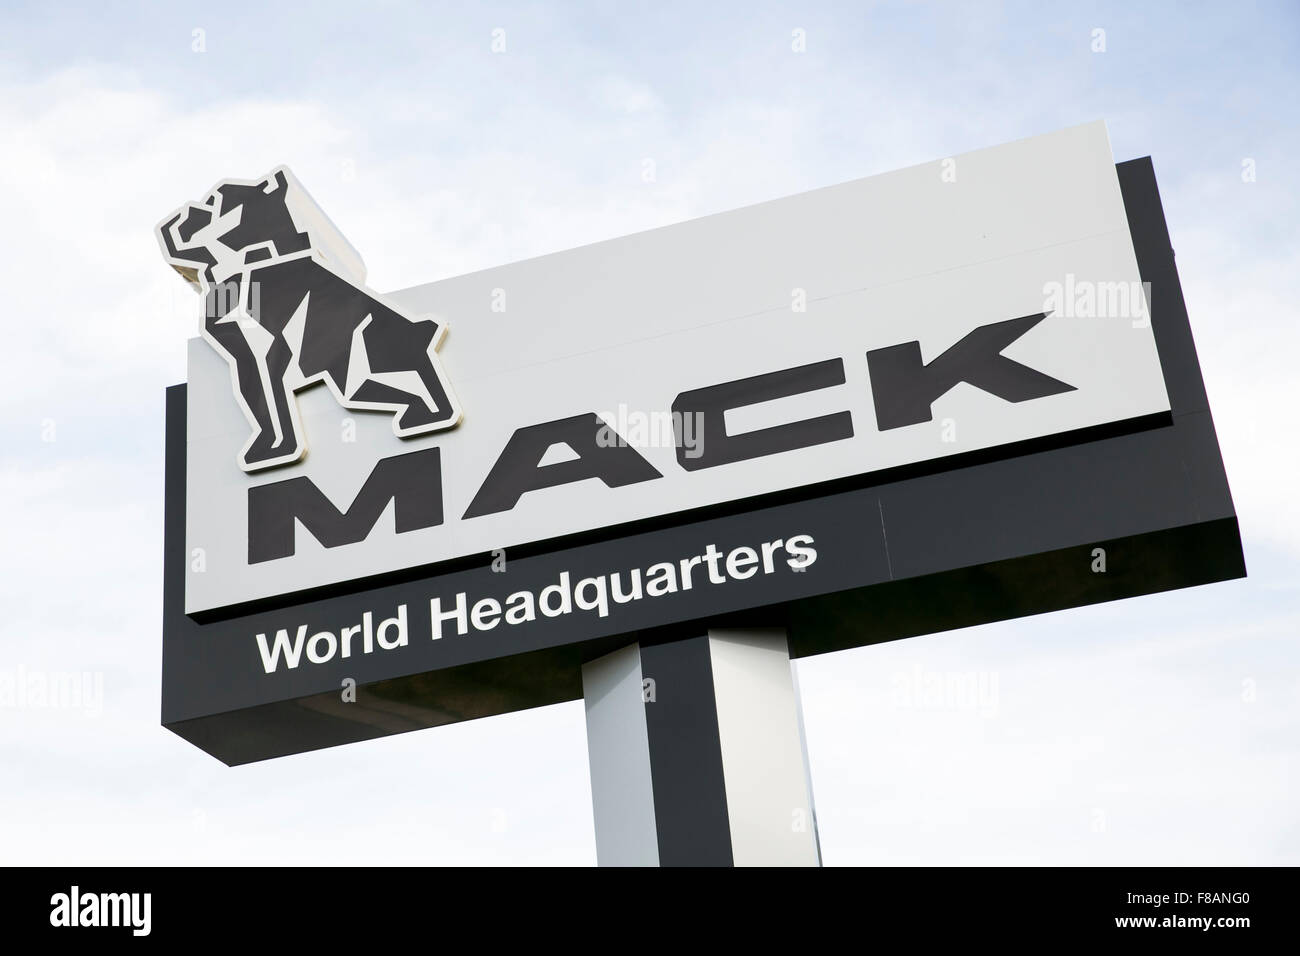 A logo sign outside of the headquarters of Mack Trucks, Inc., in